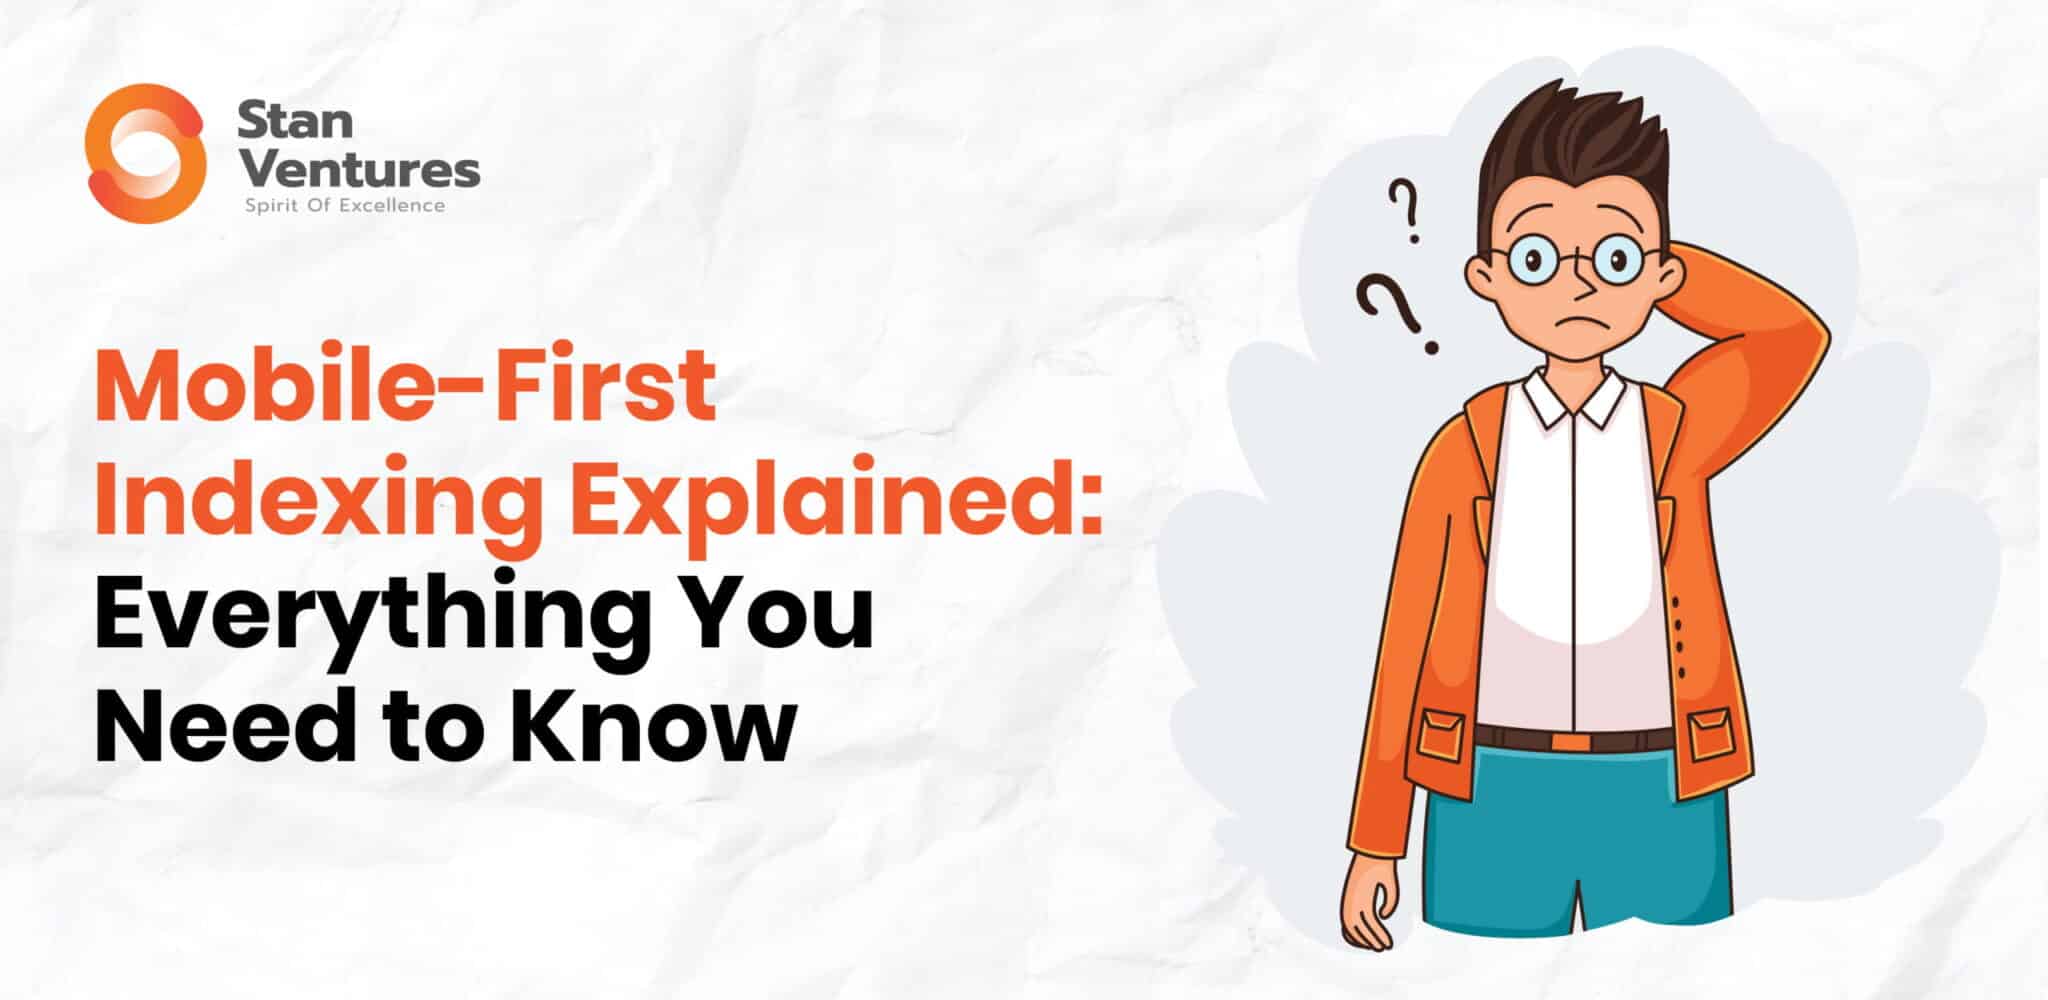 mobile-first indexing explained: everything you need to know featured image